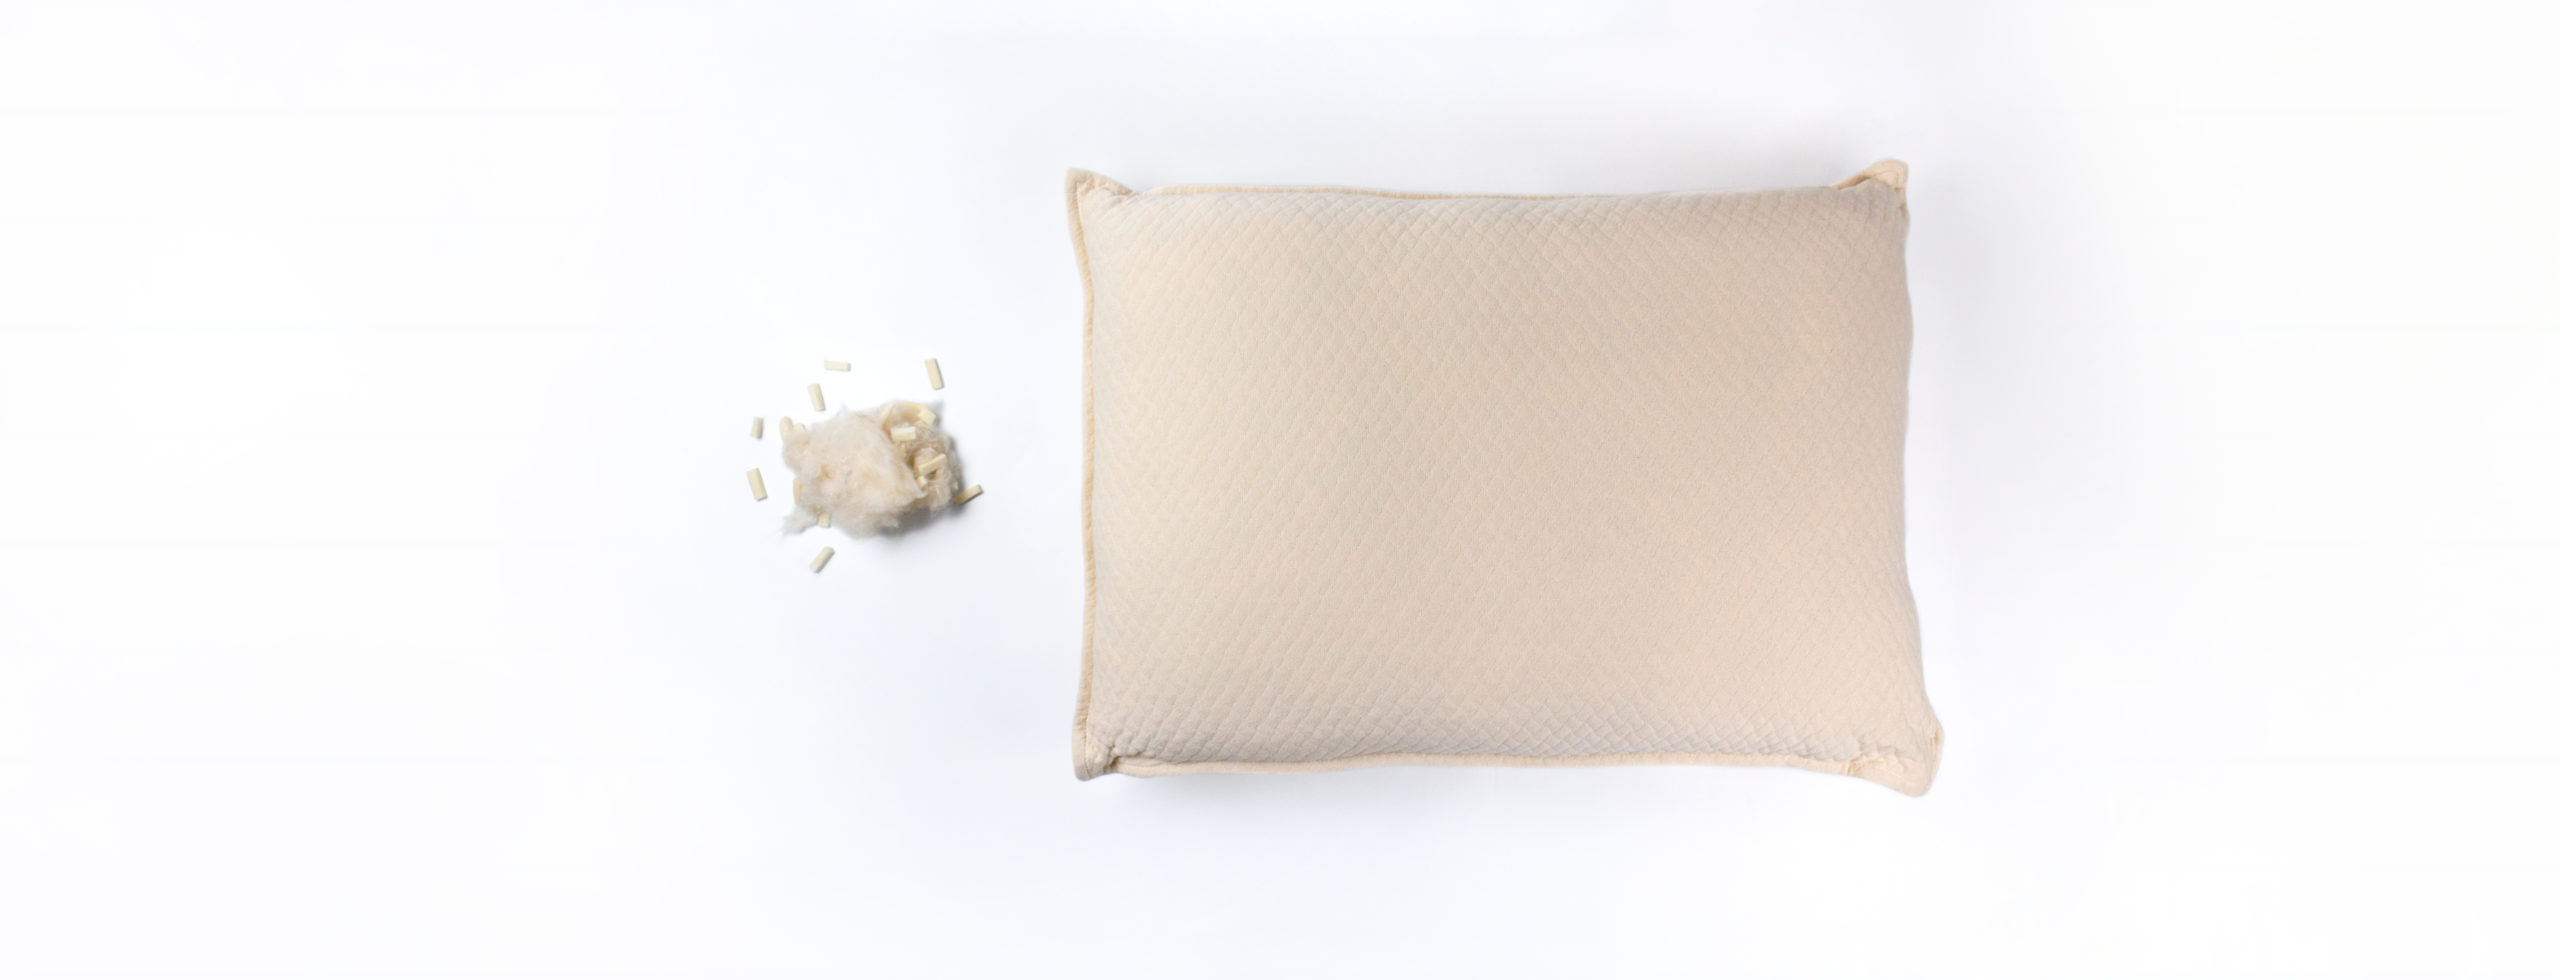 Flip Pillow with Fill